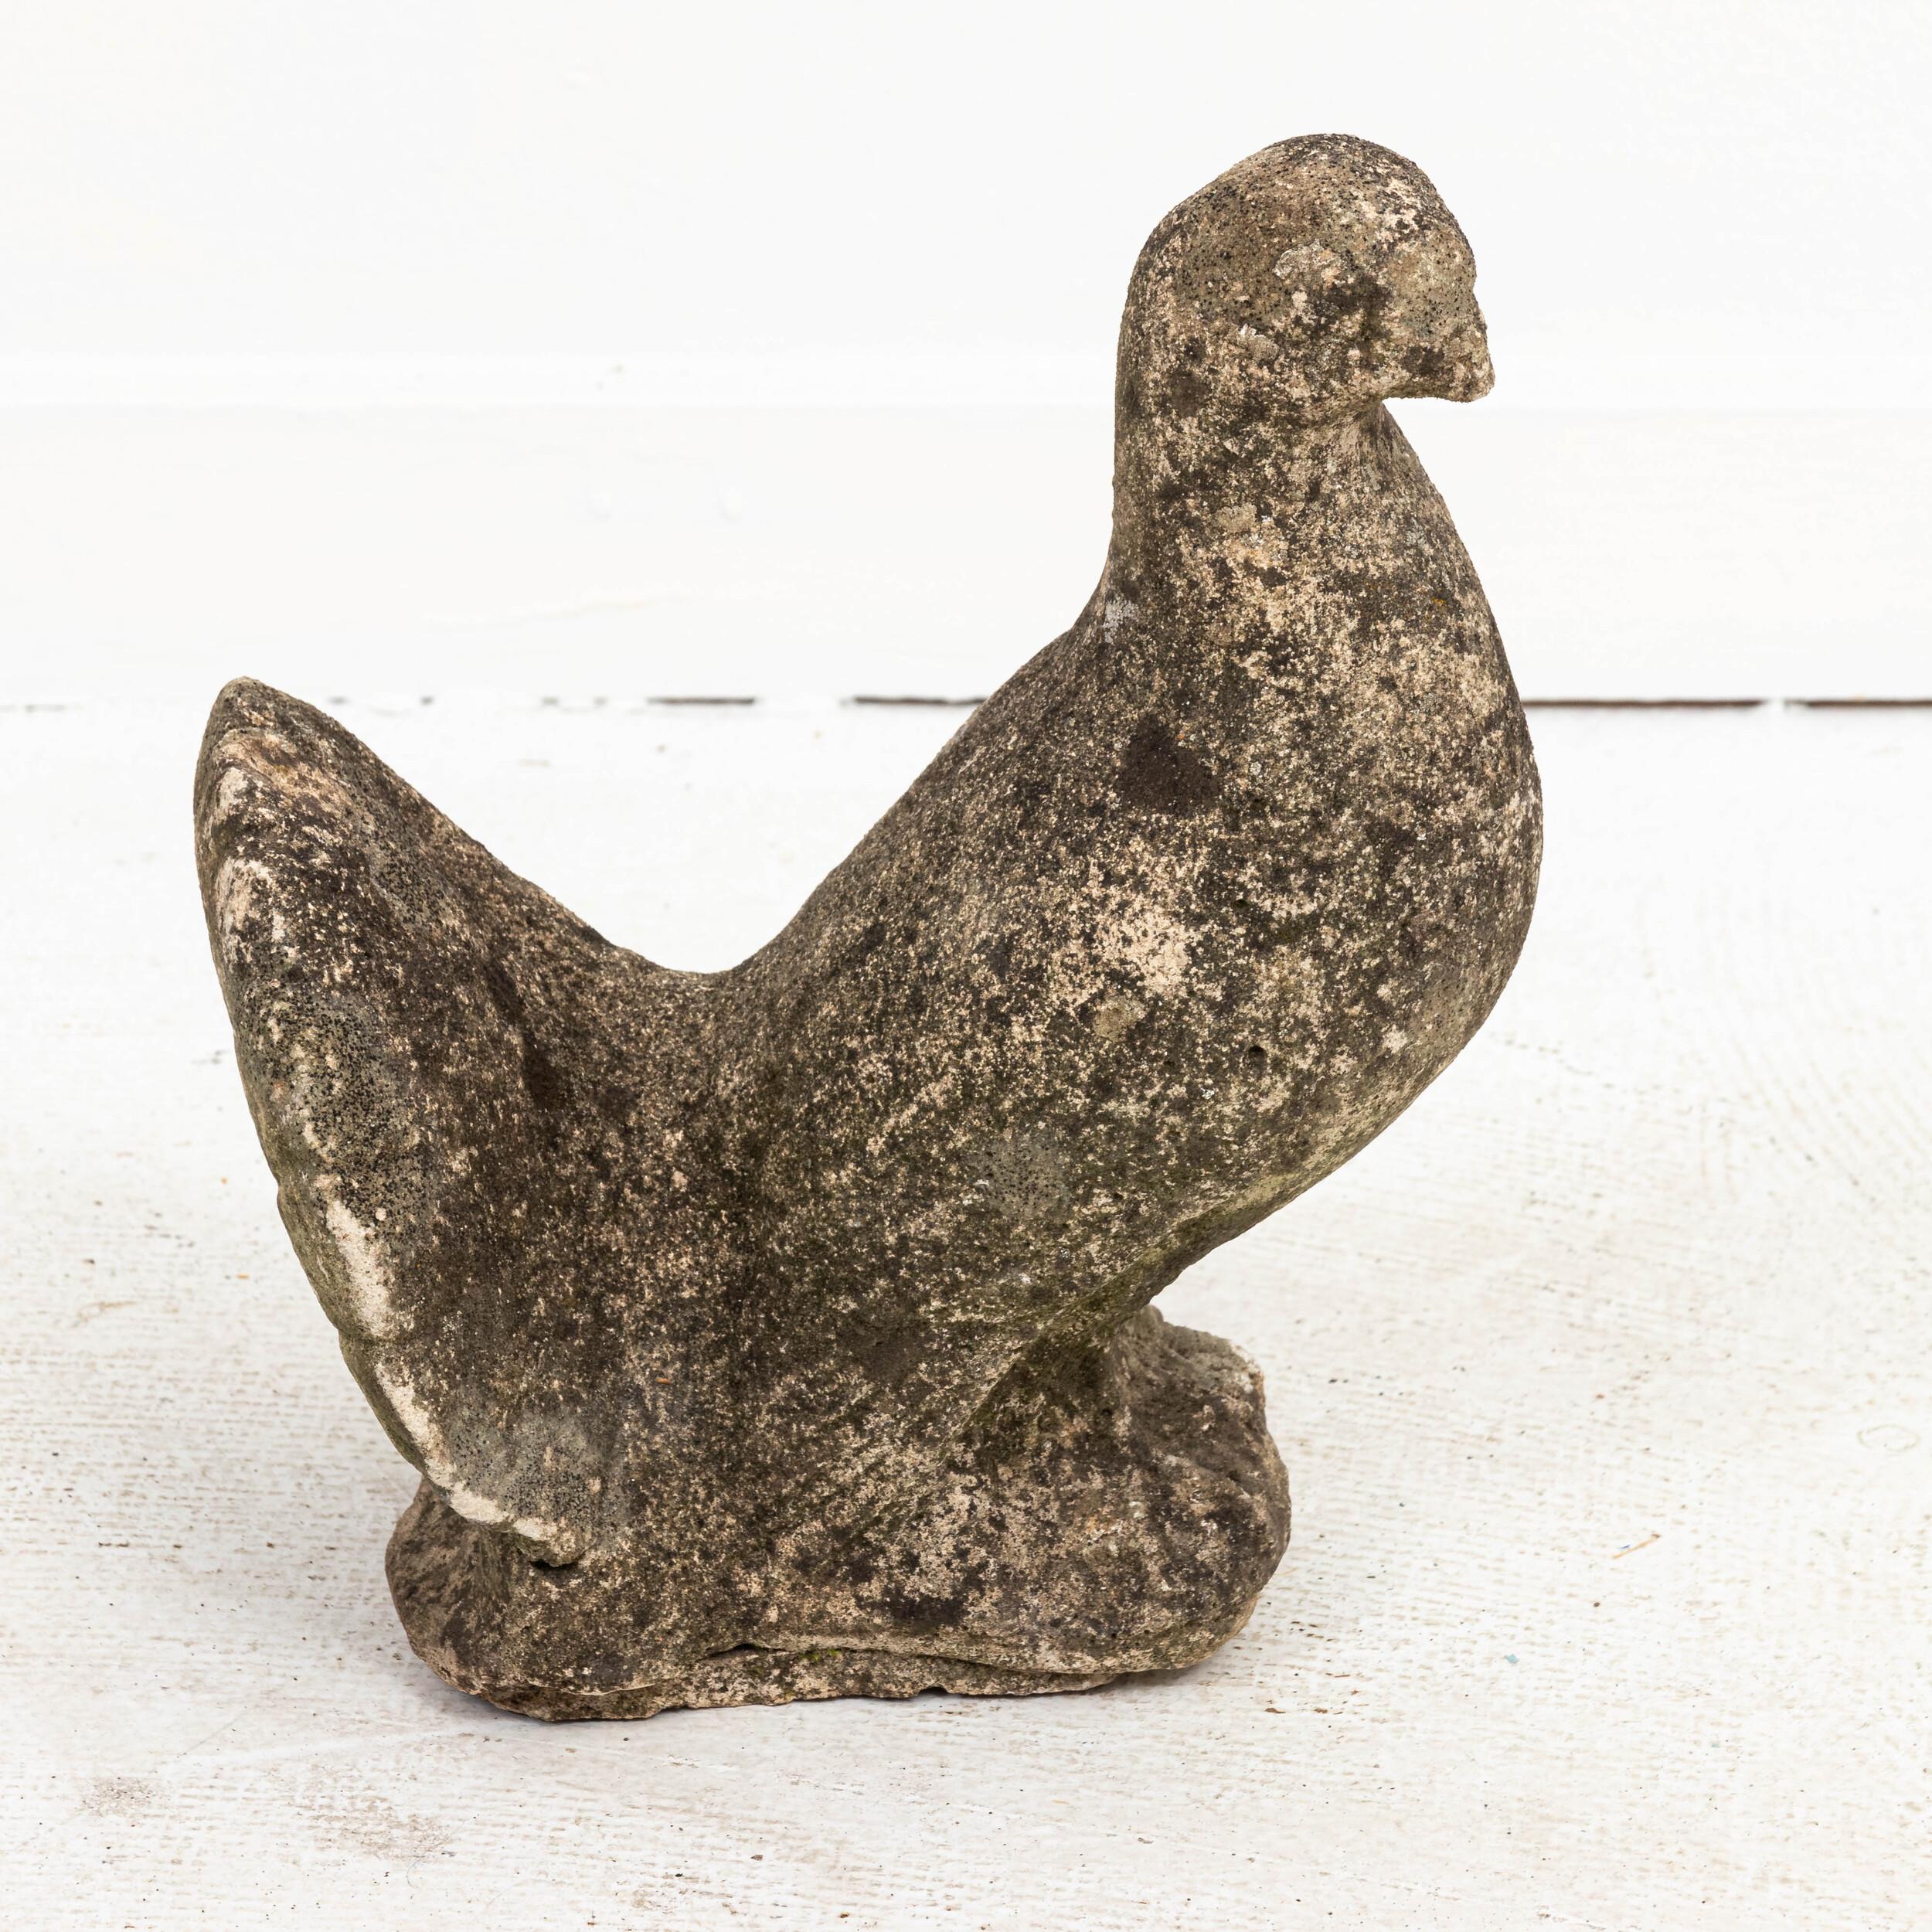 Unique cast stone garden statue in the shape of a pigeon or dove. Made in England in the early 20th century, this charming statue adds a playful element to the landscape. Good condition, weathered with age and exposure to the elements. Original